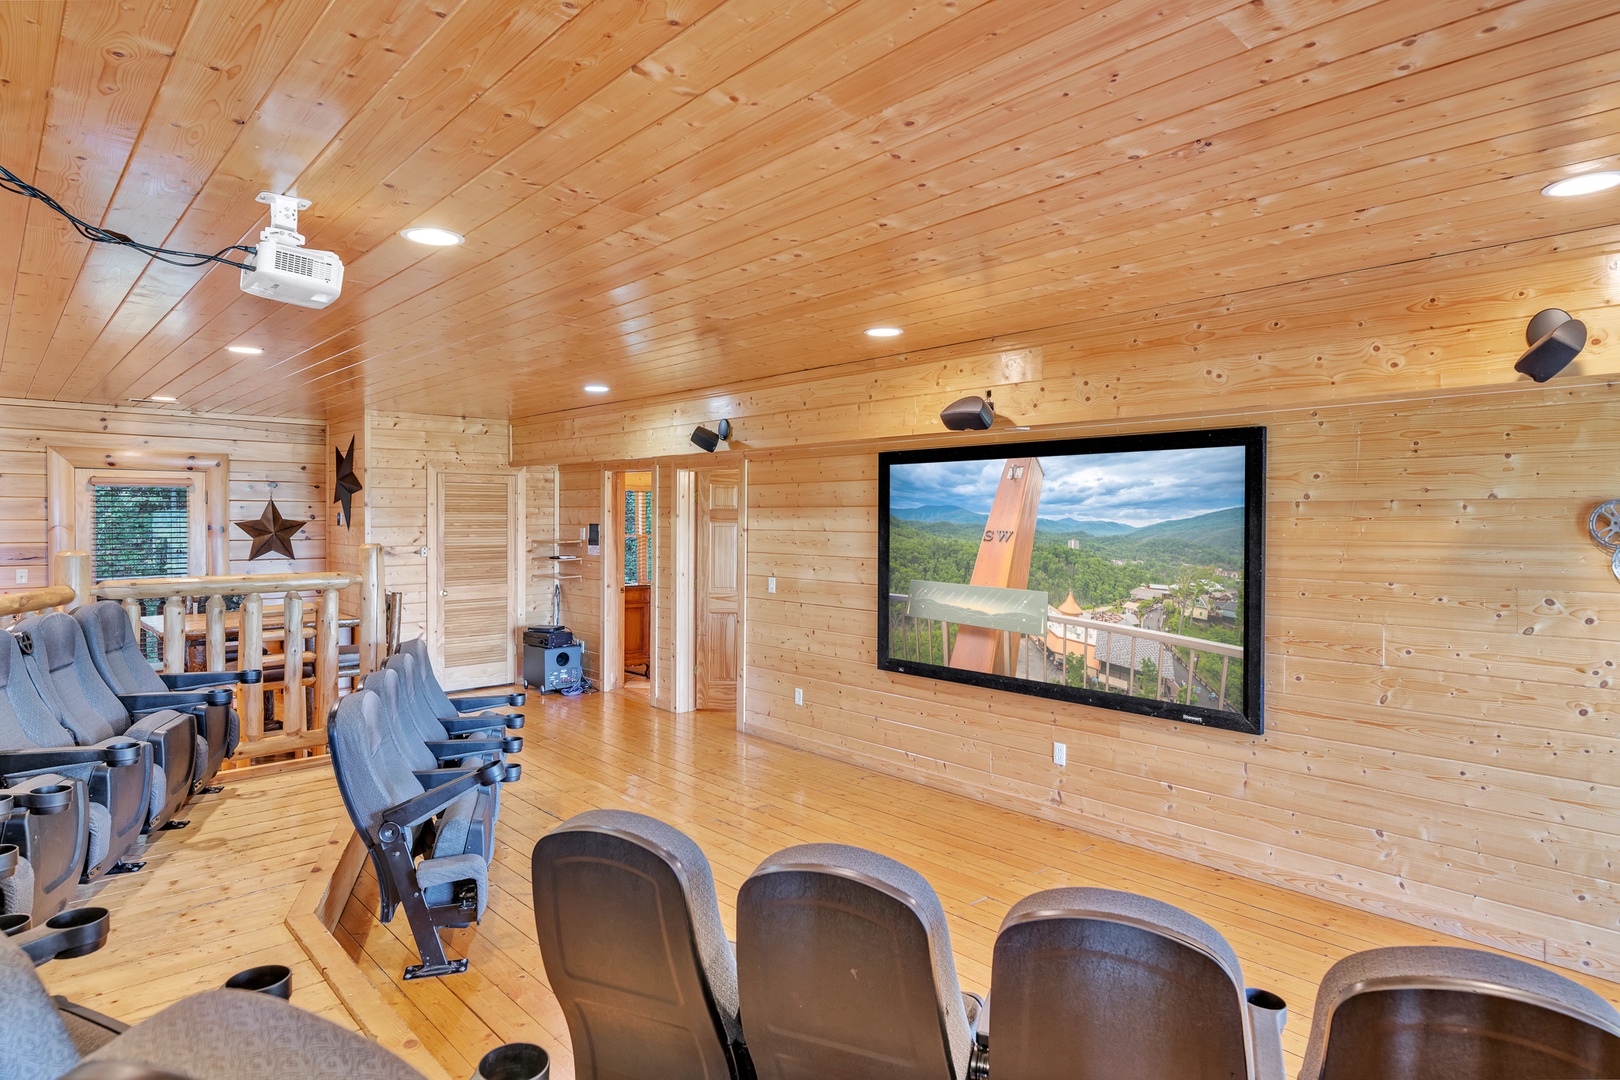 The stunning 2nd floor theater room is sure to become a family favorite!